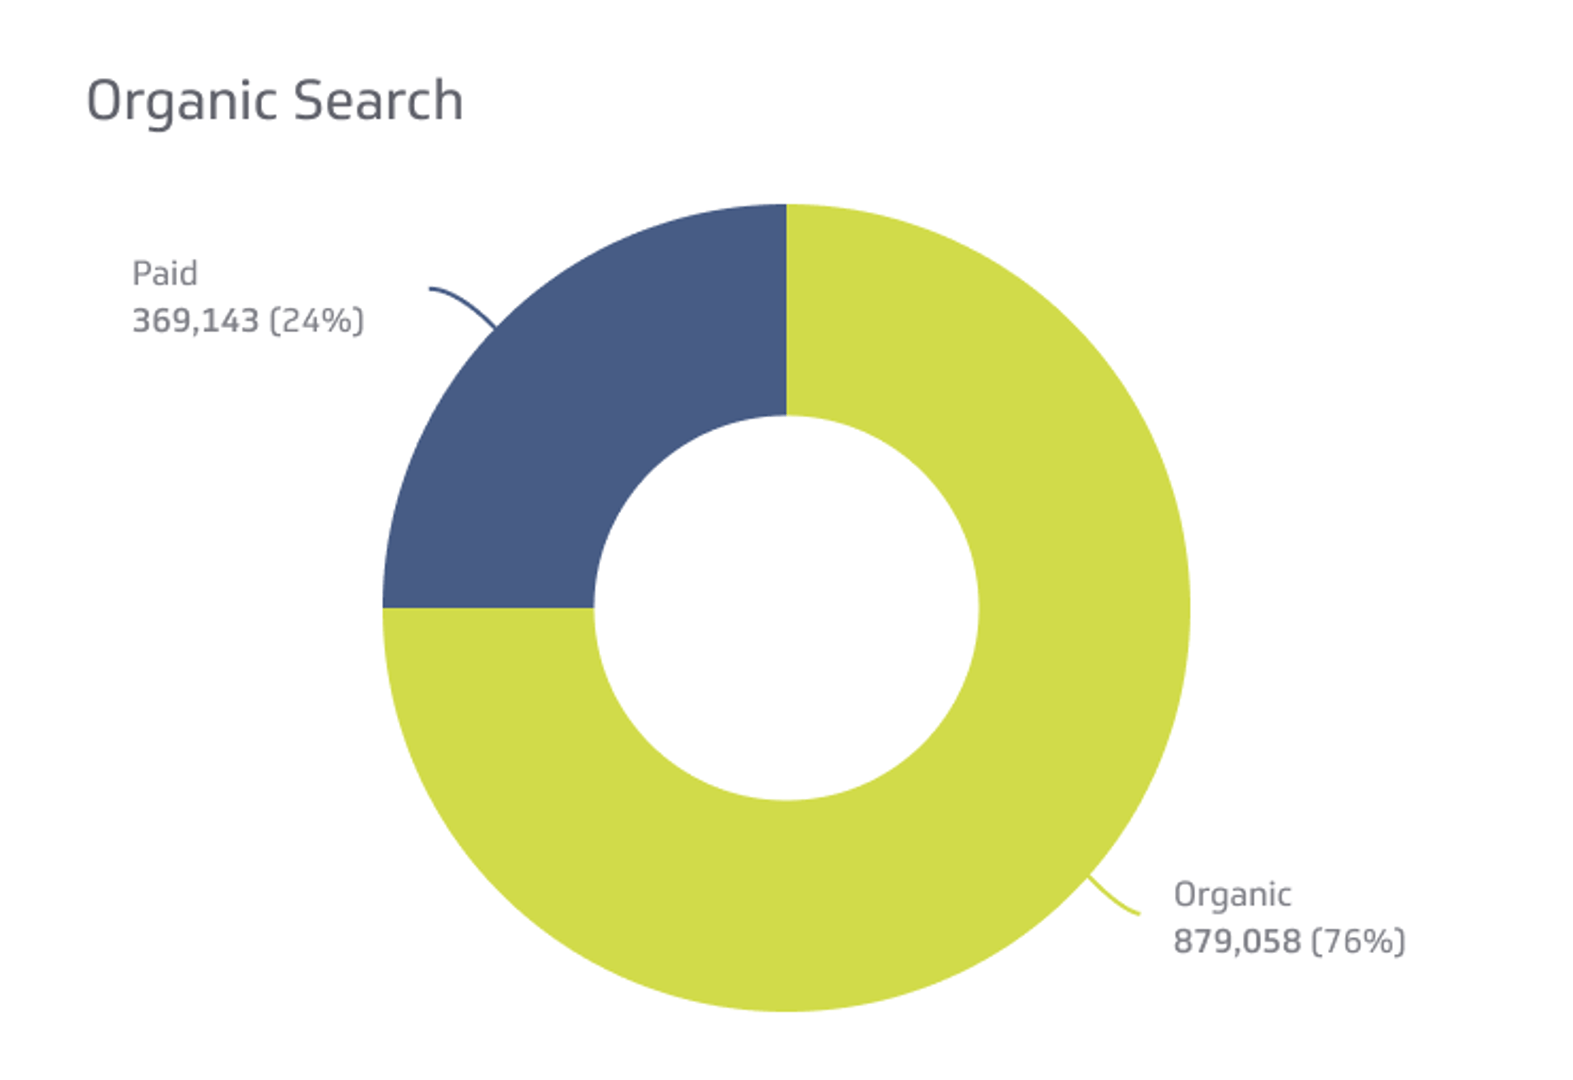 Related KPI Examples - Organic Search Metric